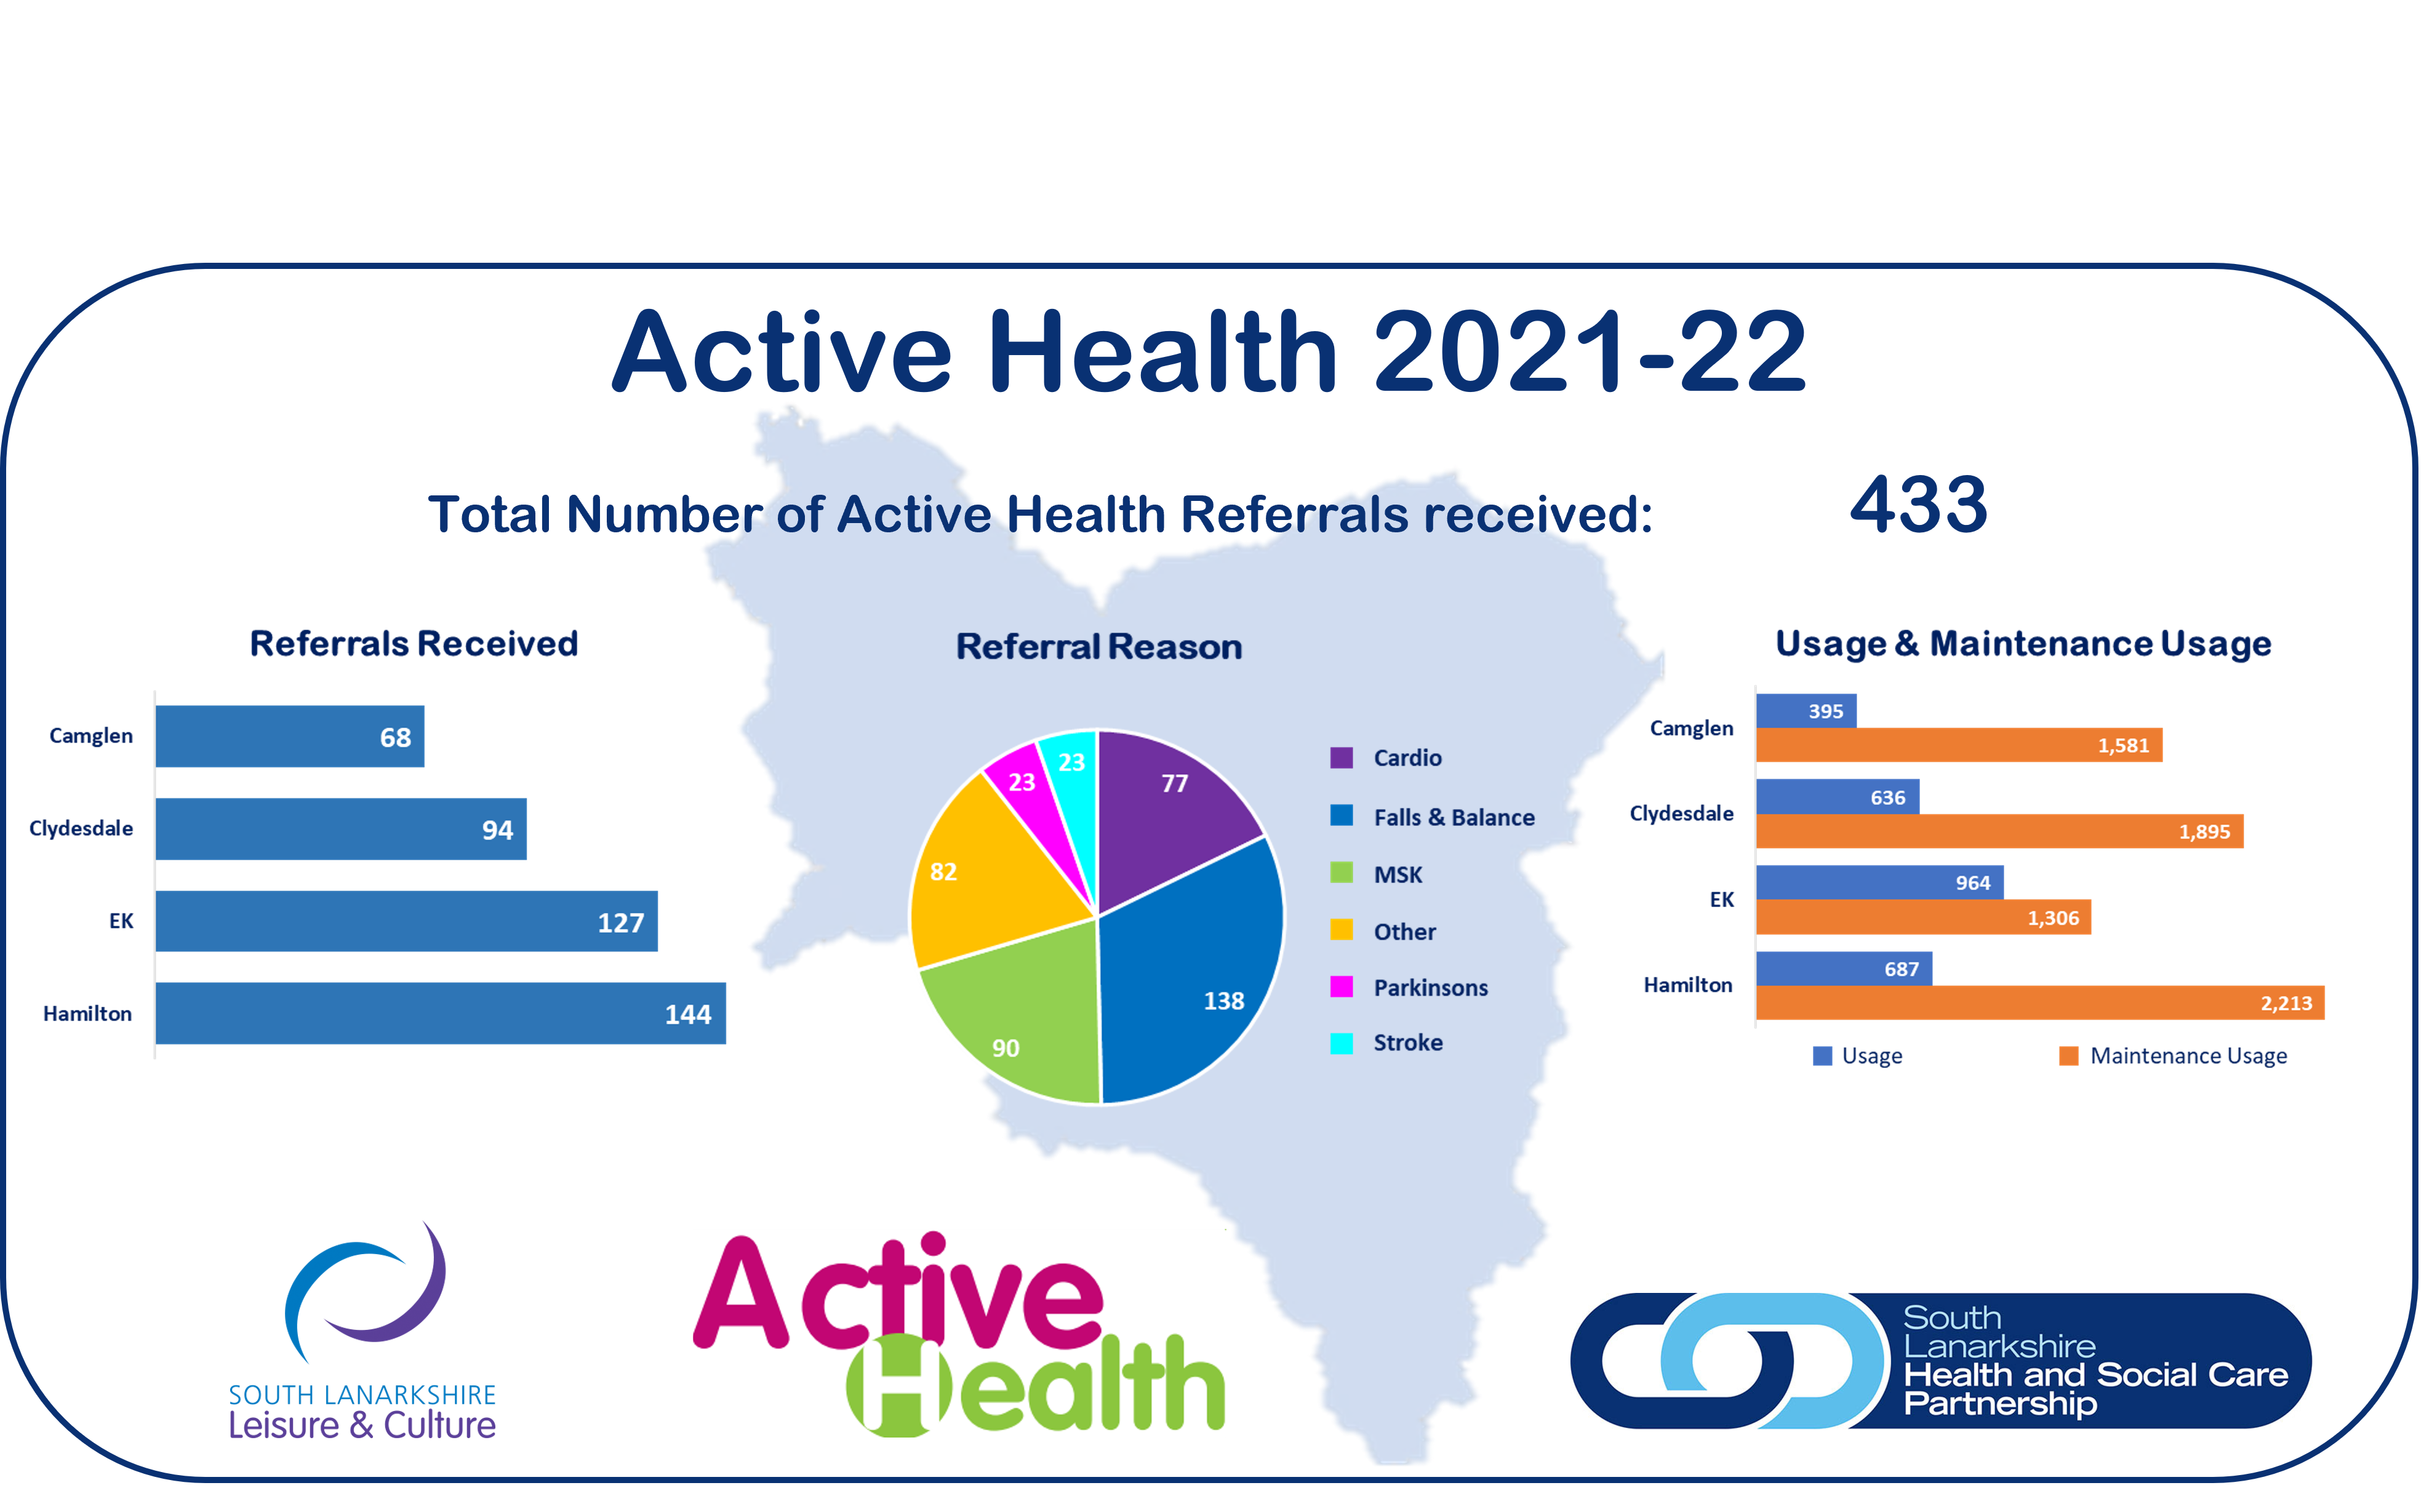 Active Health 2021-2022 information; total referrals 433 with graphs showing split by geographical area, referral reason, and usage / maintenance usage